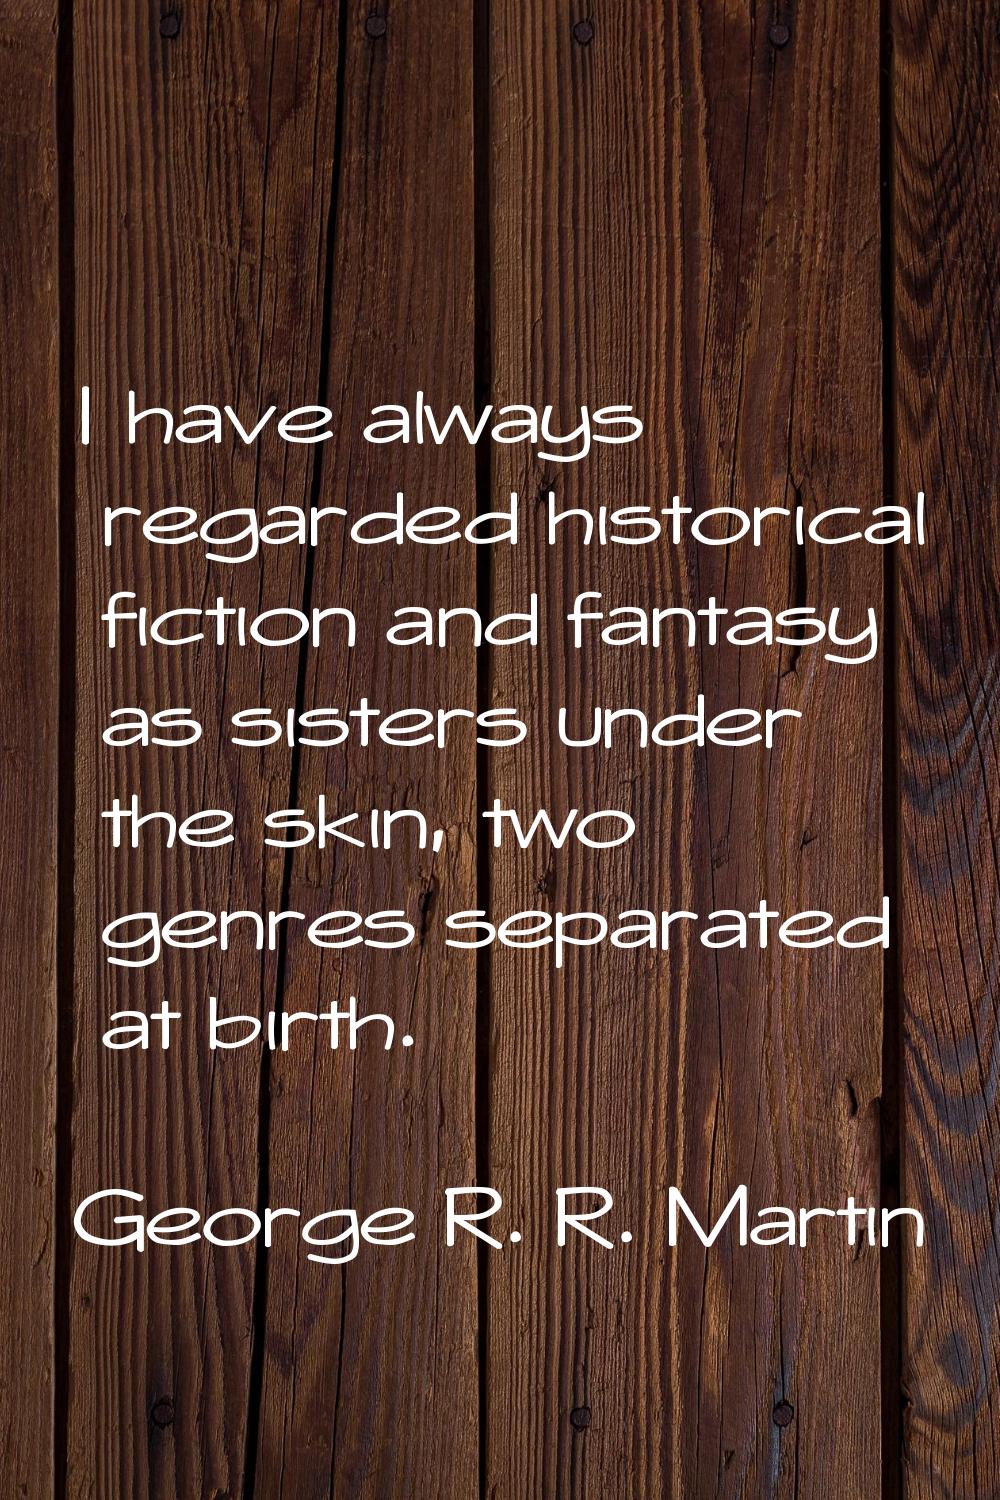 I have always regarded historical fiction and fantasy as sisters under the skin, two genres separat